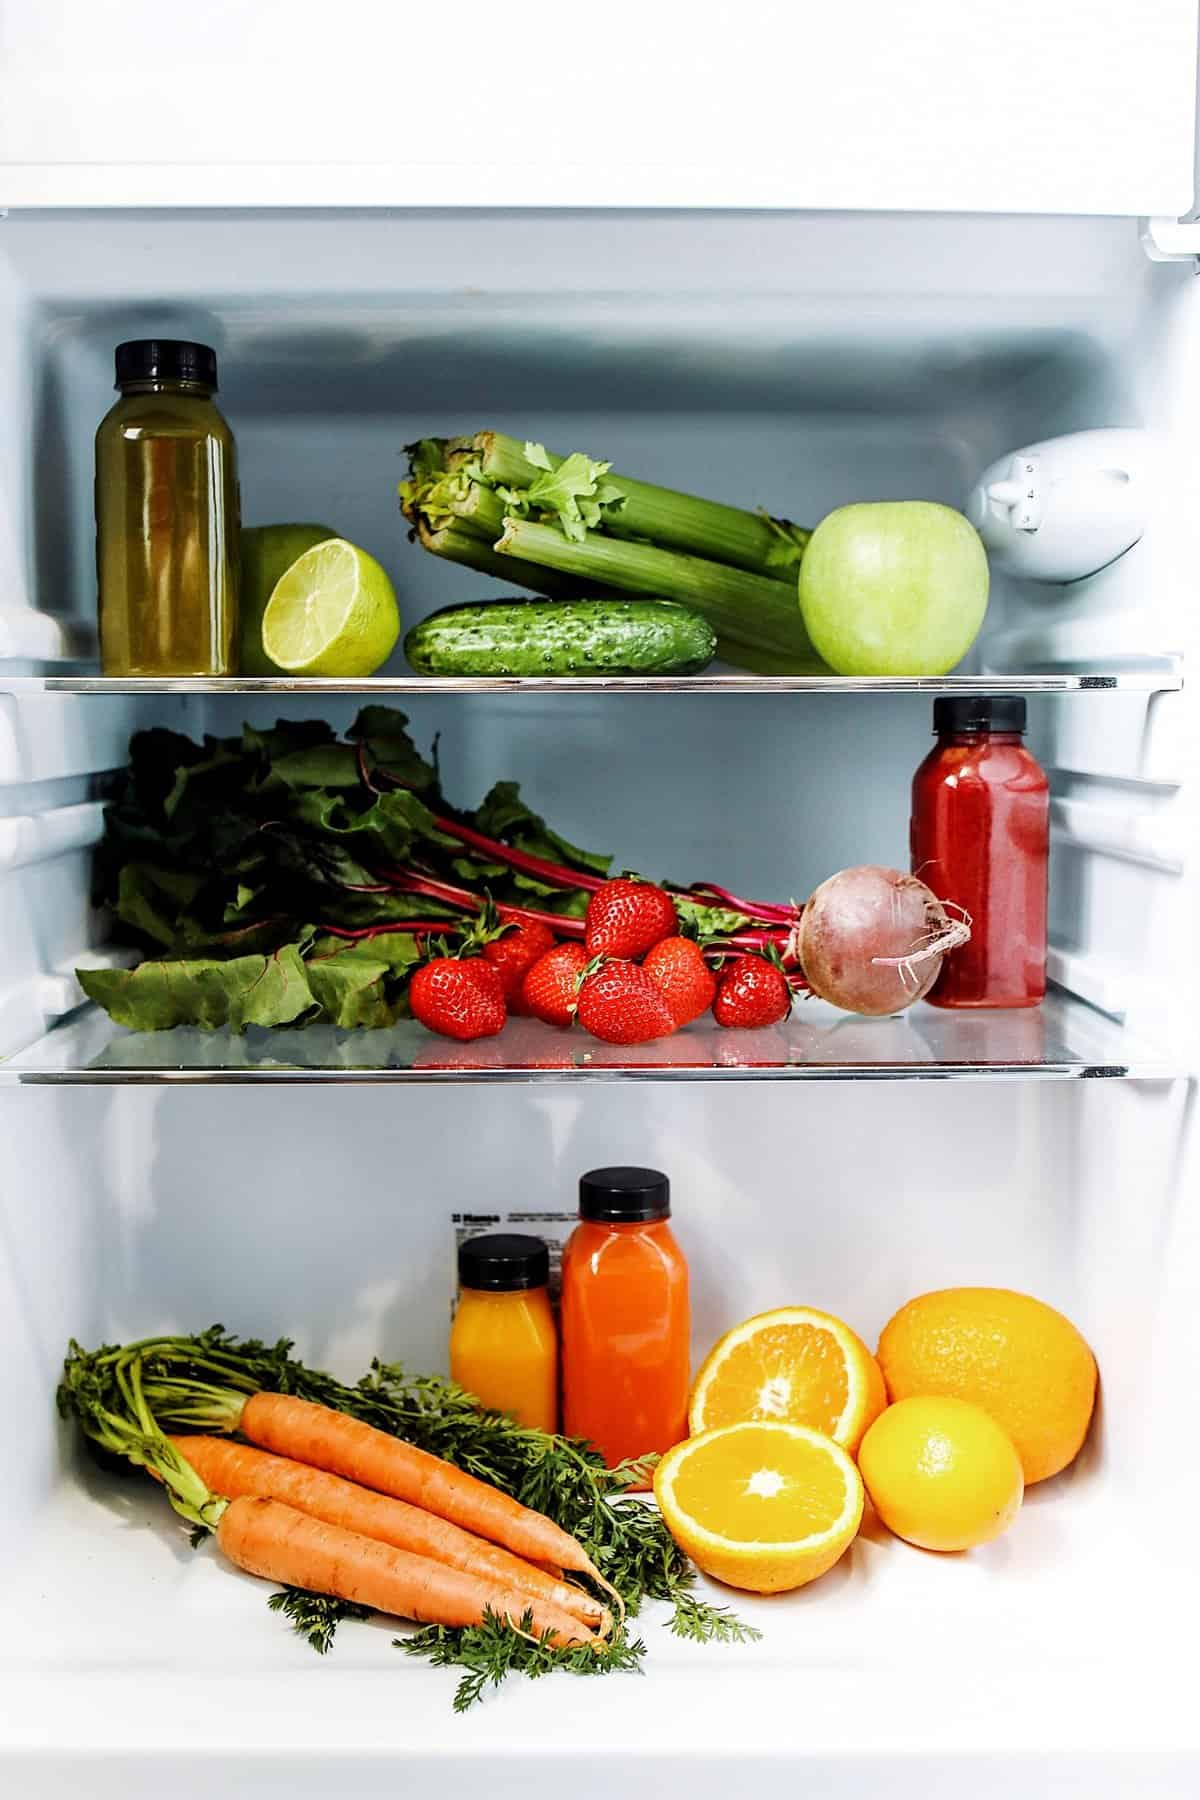 Fridge shelves stocked with healthy food, veggies and fruit in an ingredient household.